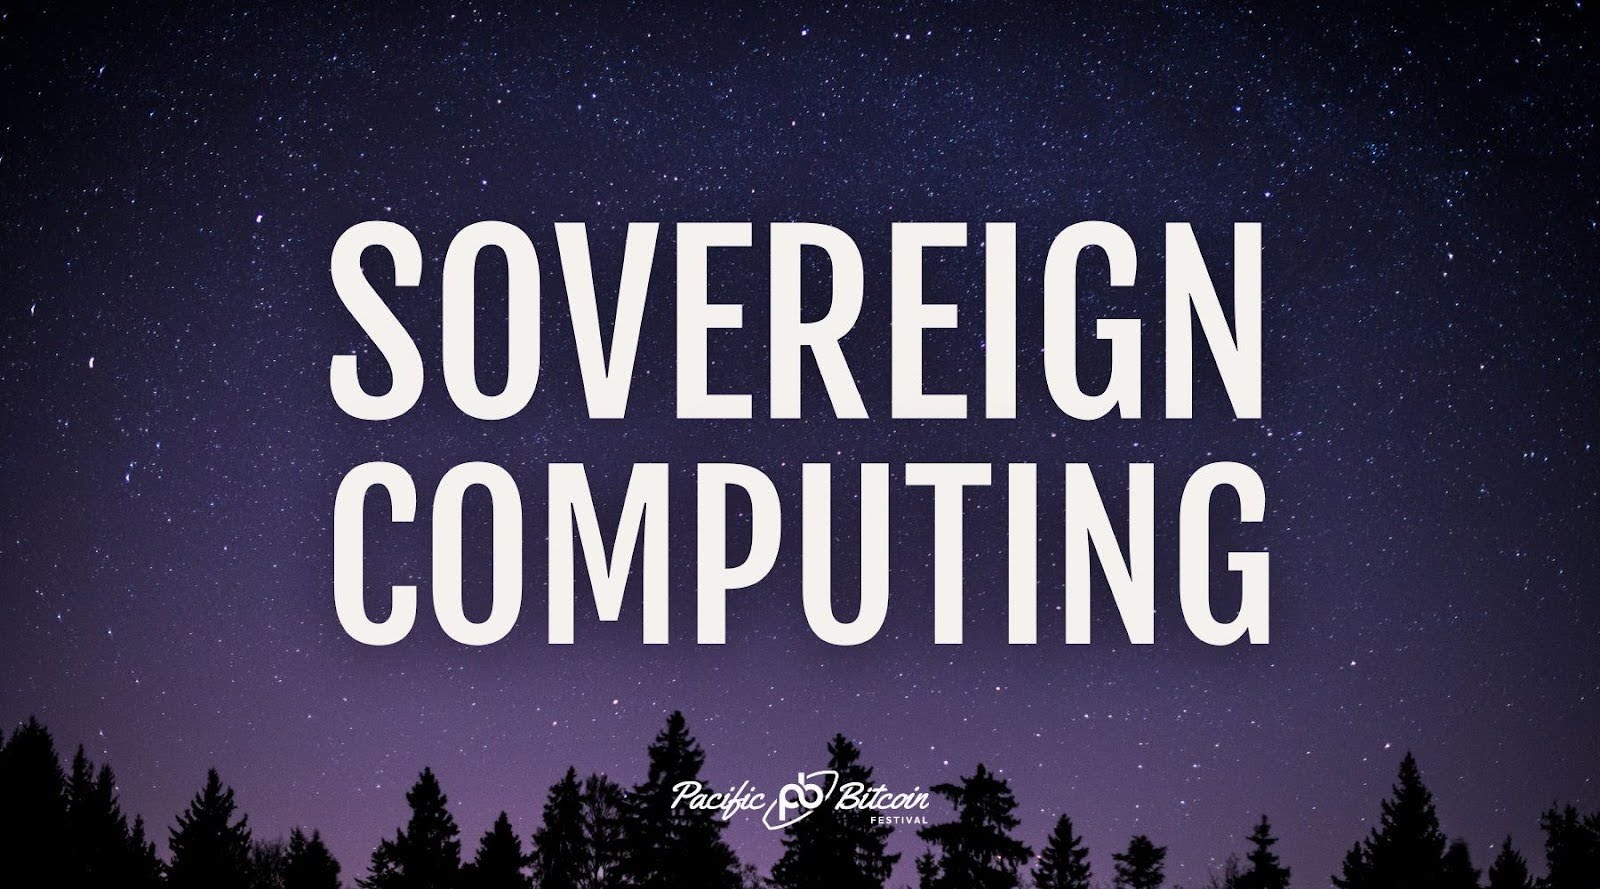 Sovereign Computing with Start9